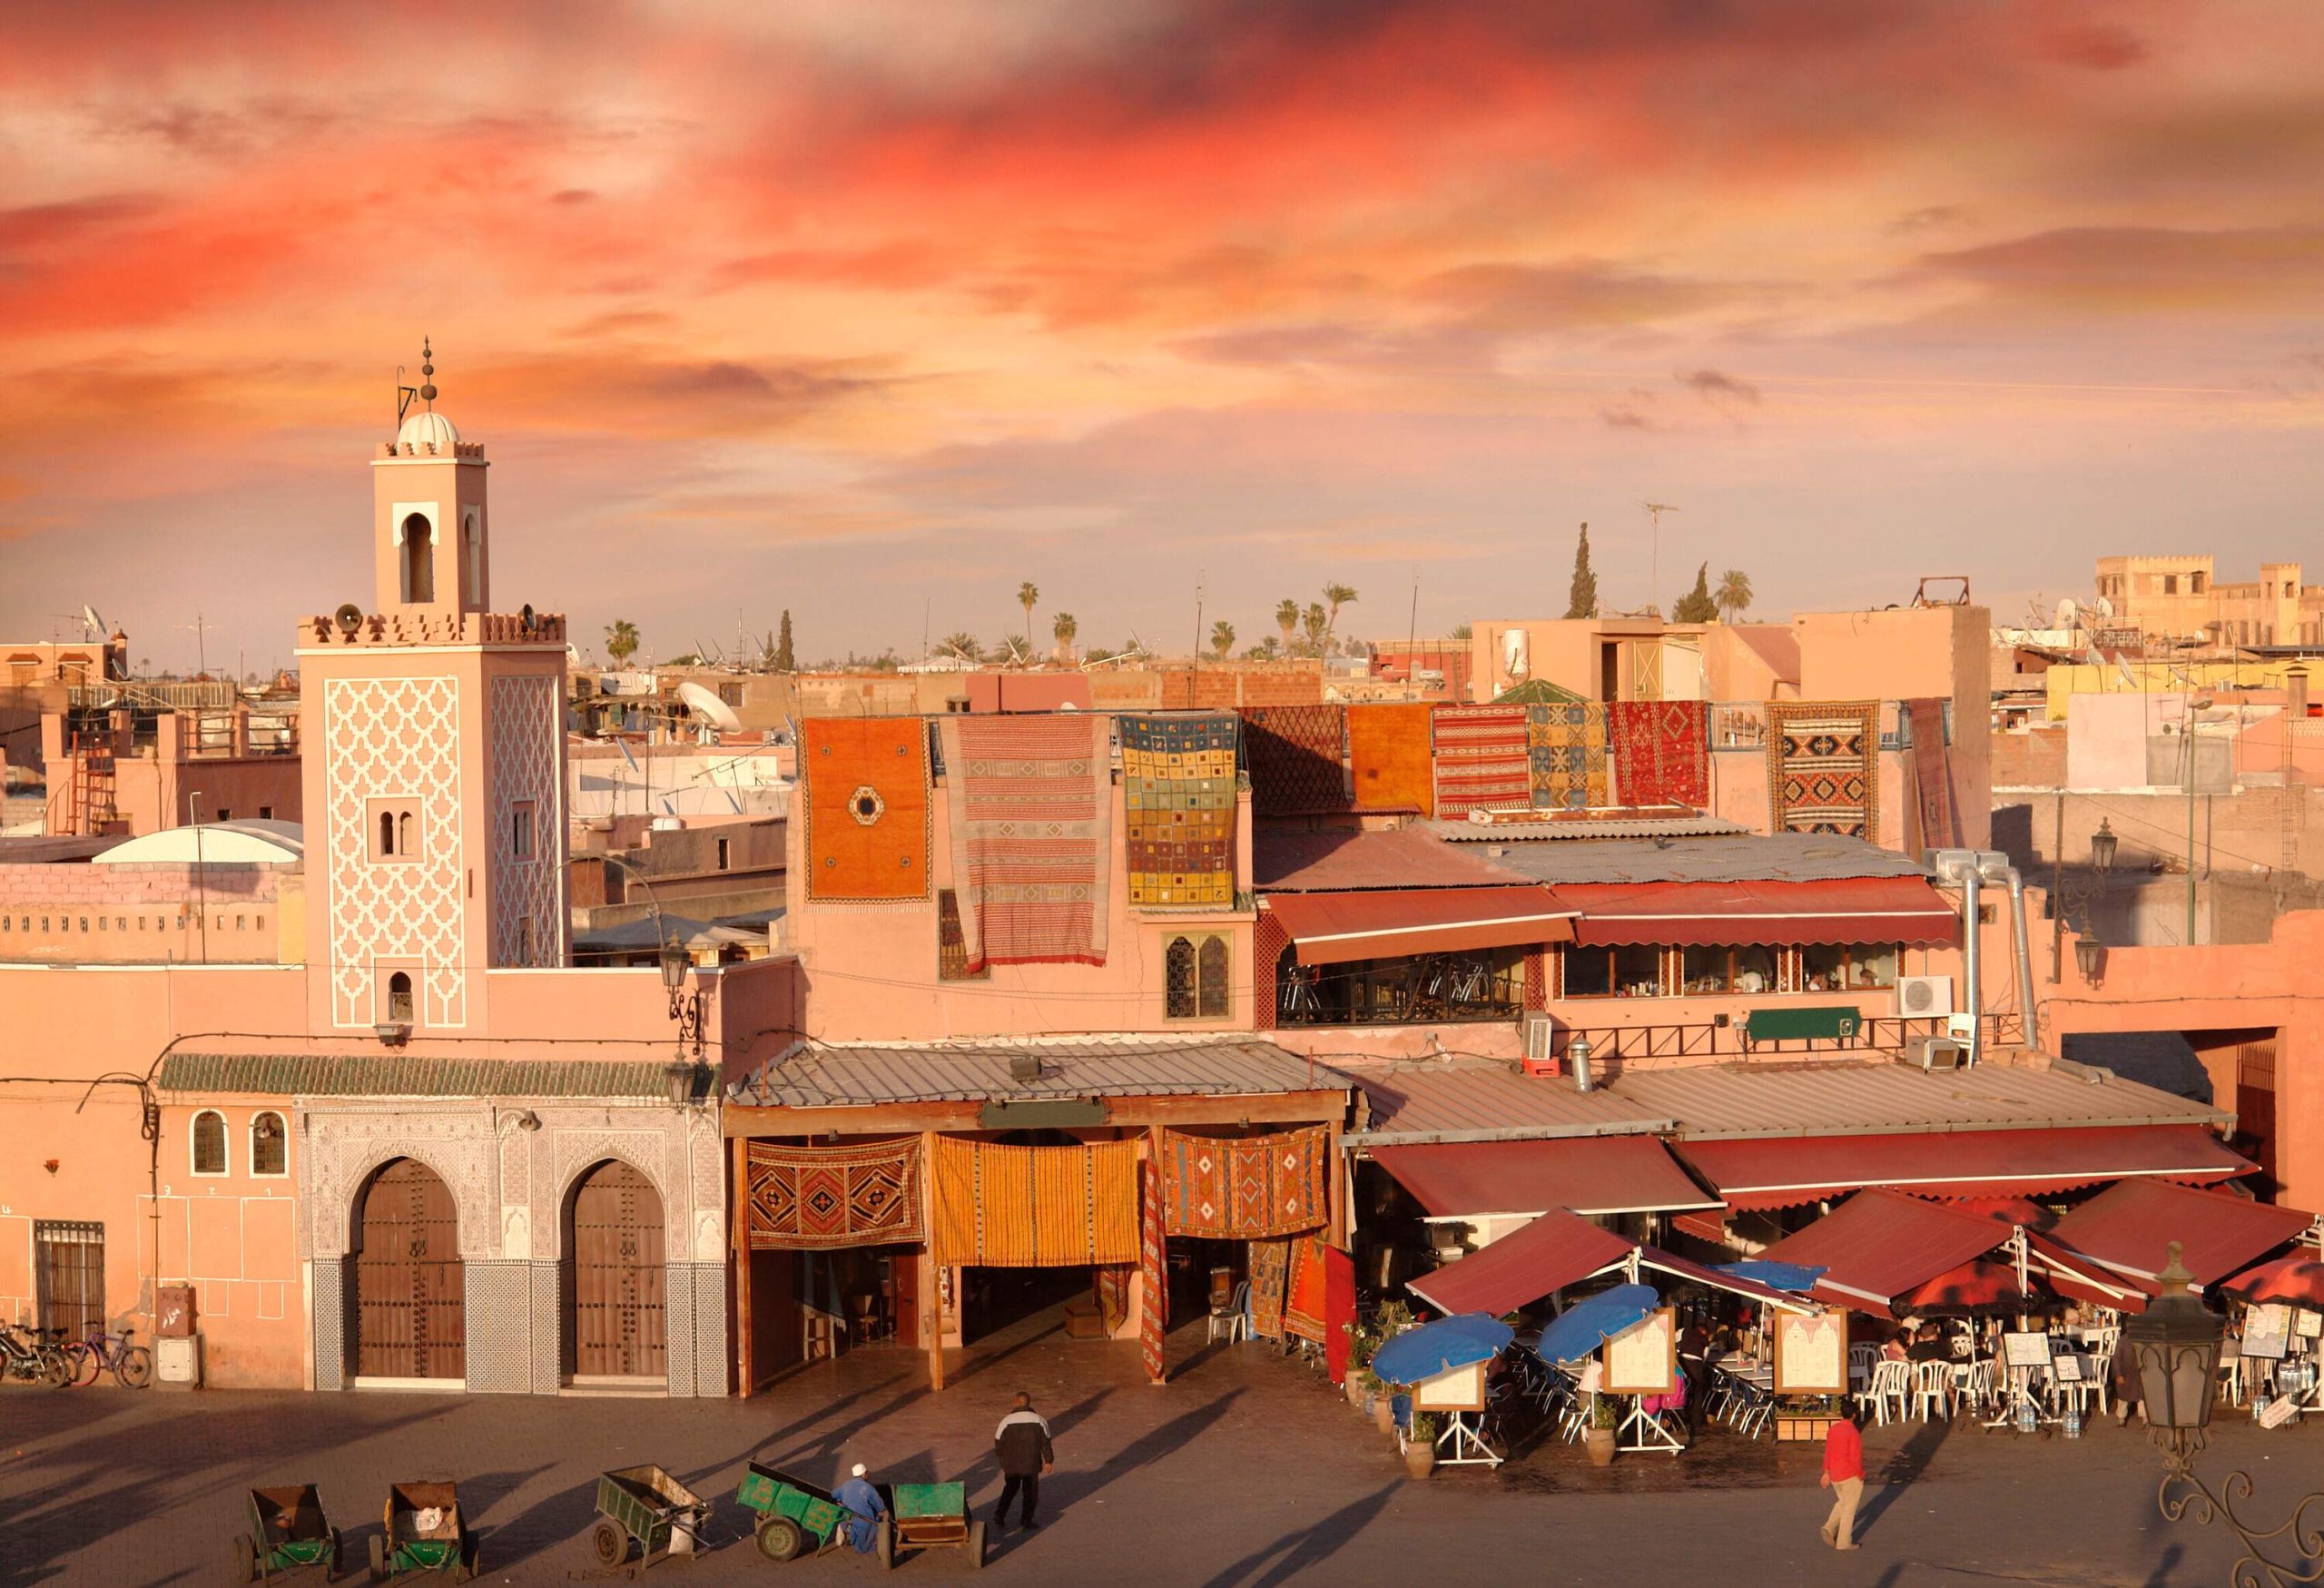 The iconic Djemaa el-Fna Square stands empty, bathed in the warm glow of the setting sun.